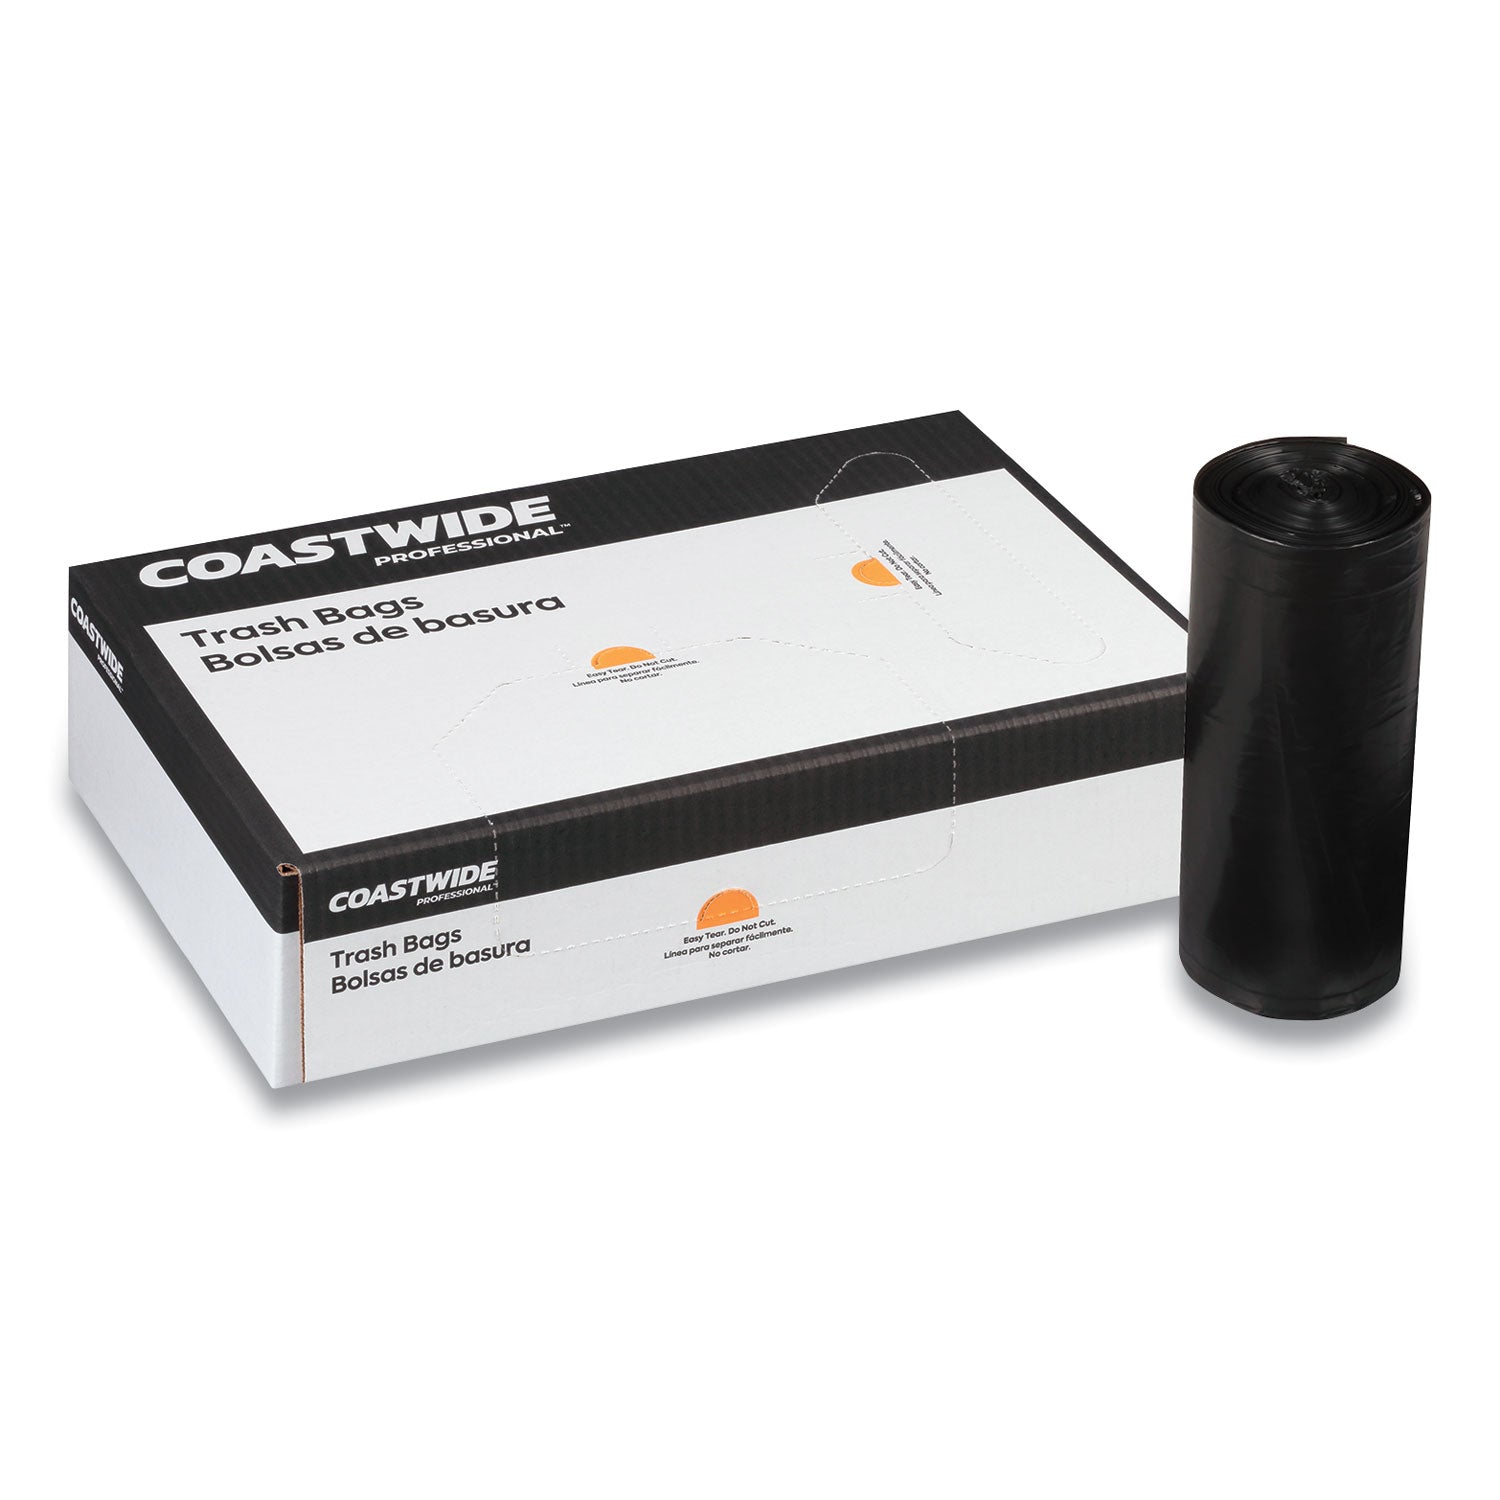 high-density-can-liners-56-gal-16-to-20-mic-43-x-48-black-25-bags-roll-8-rolls-carton_cwz168571 - 2